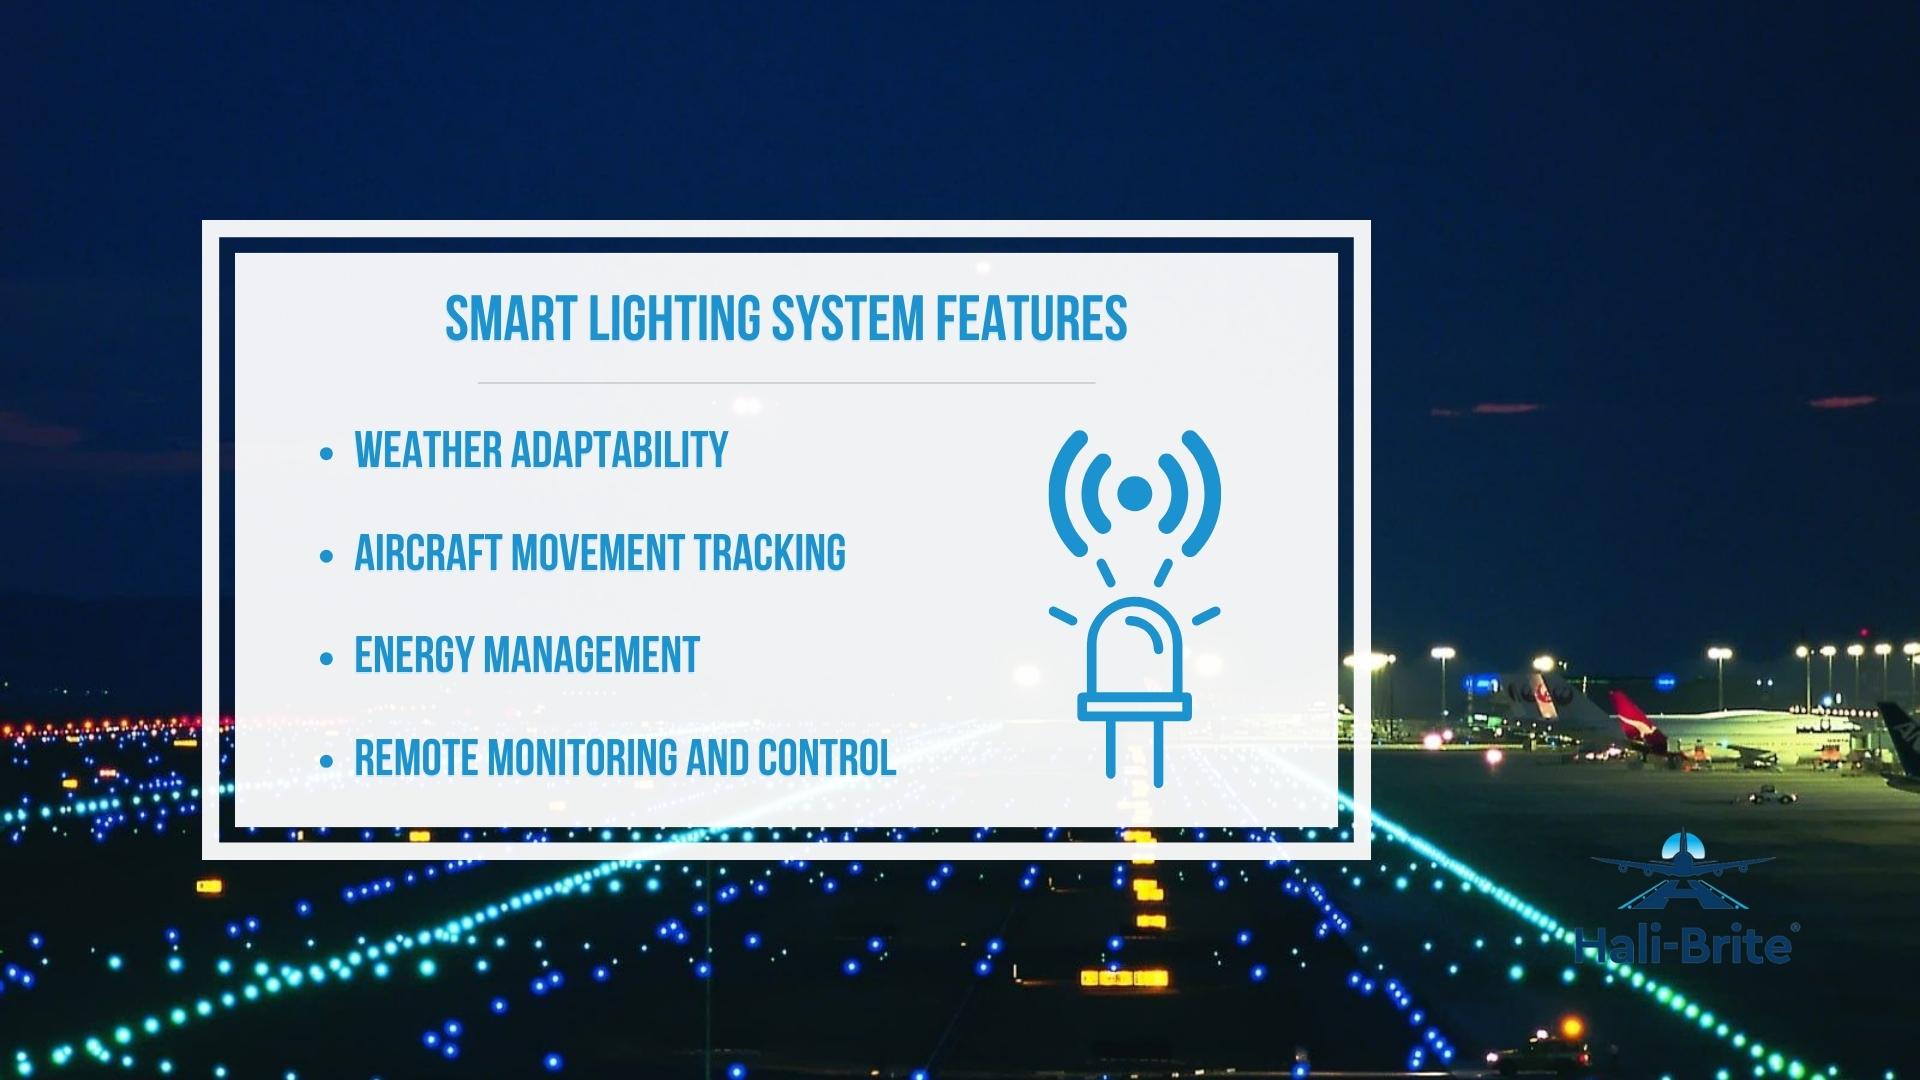 Infographic image of smart lighting system features